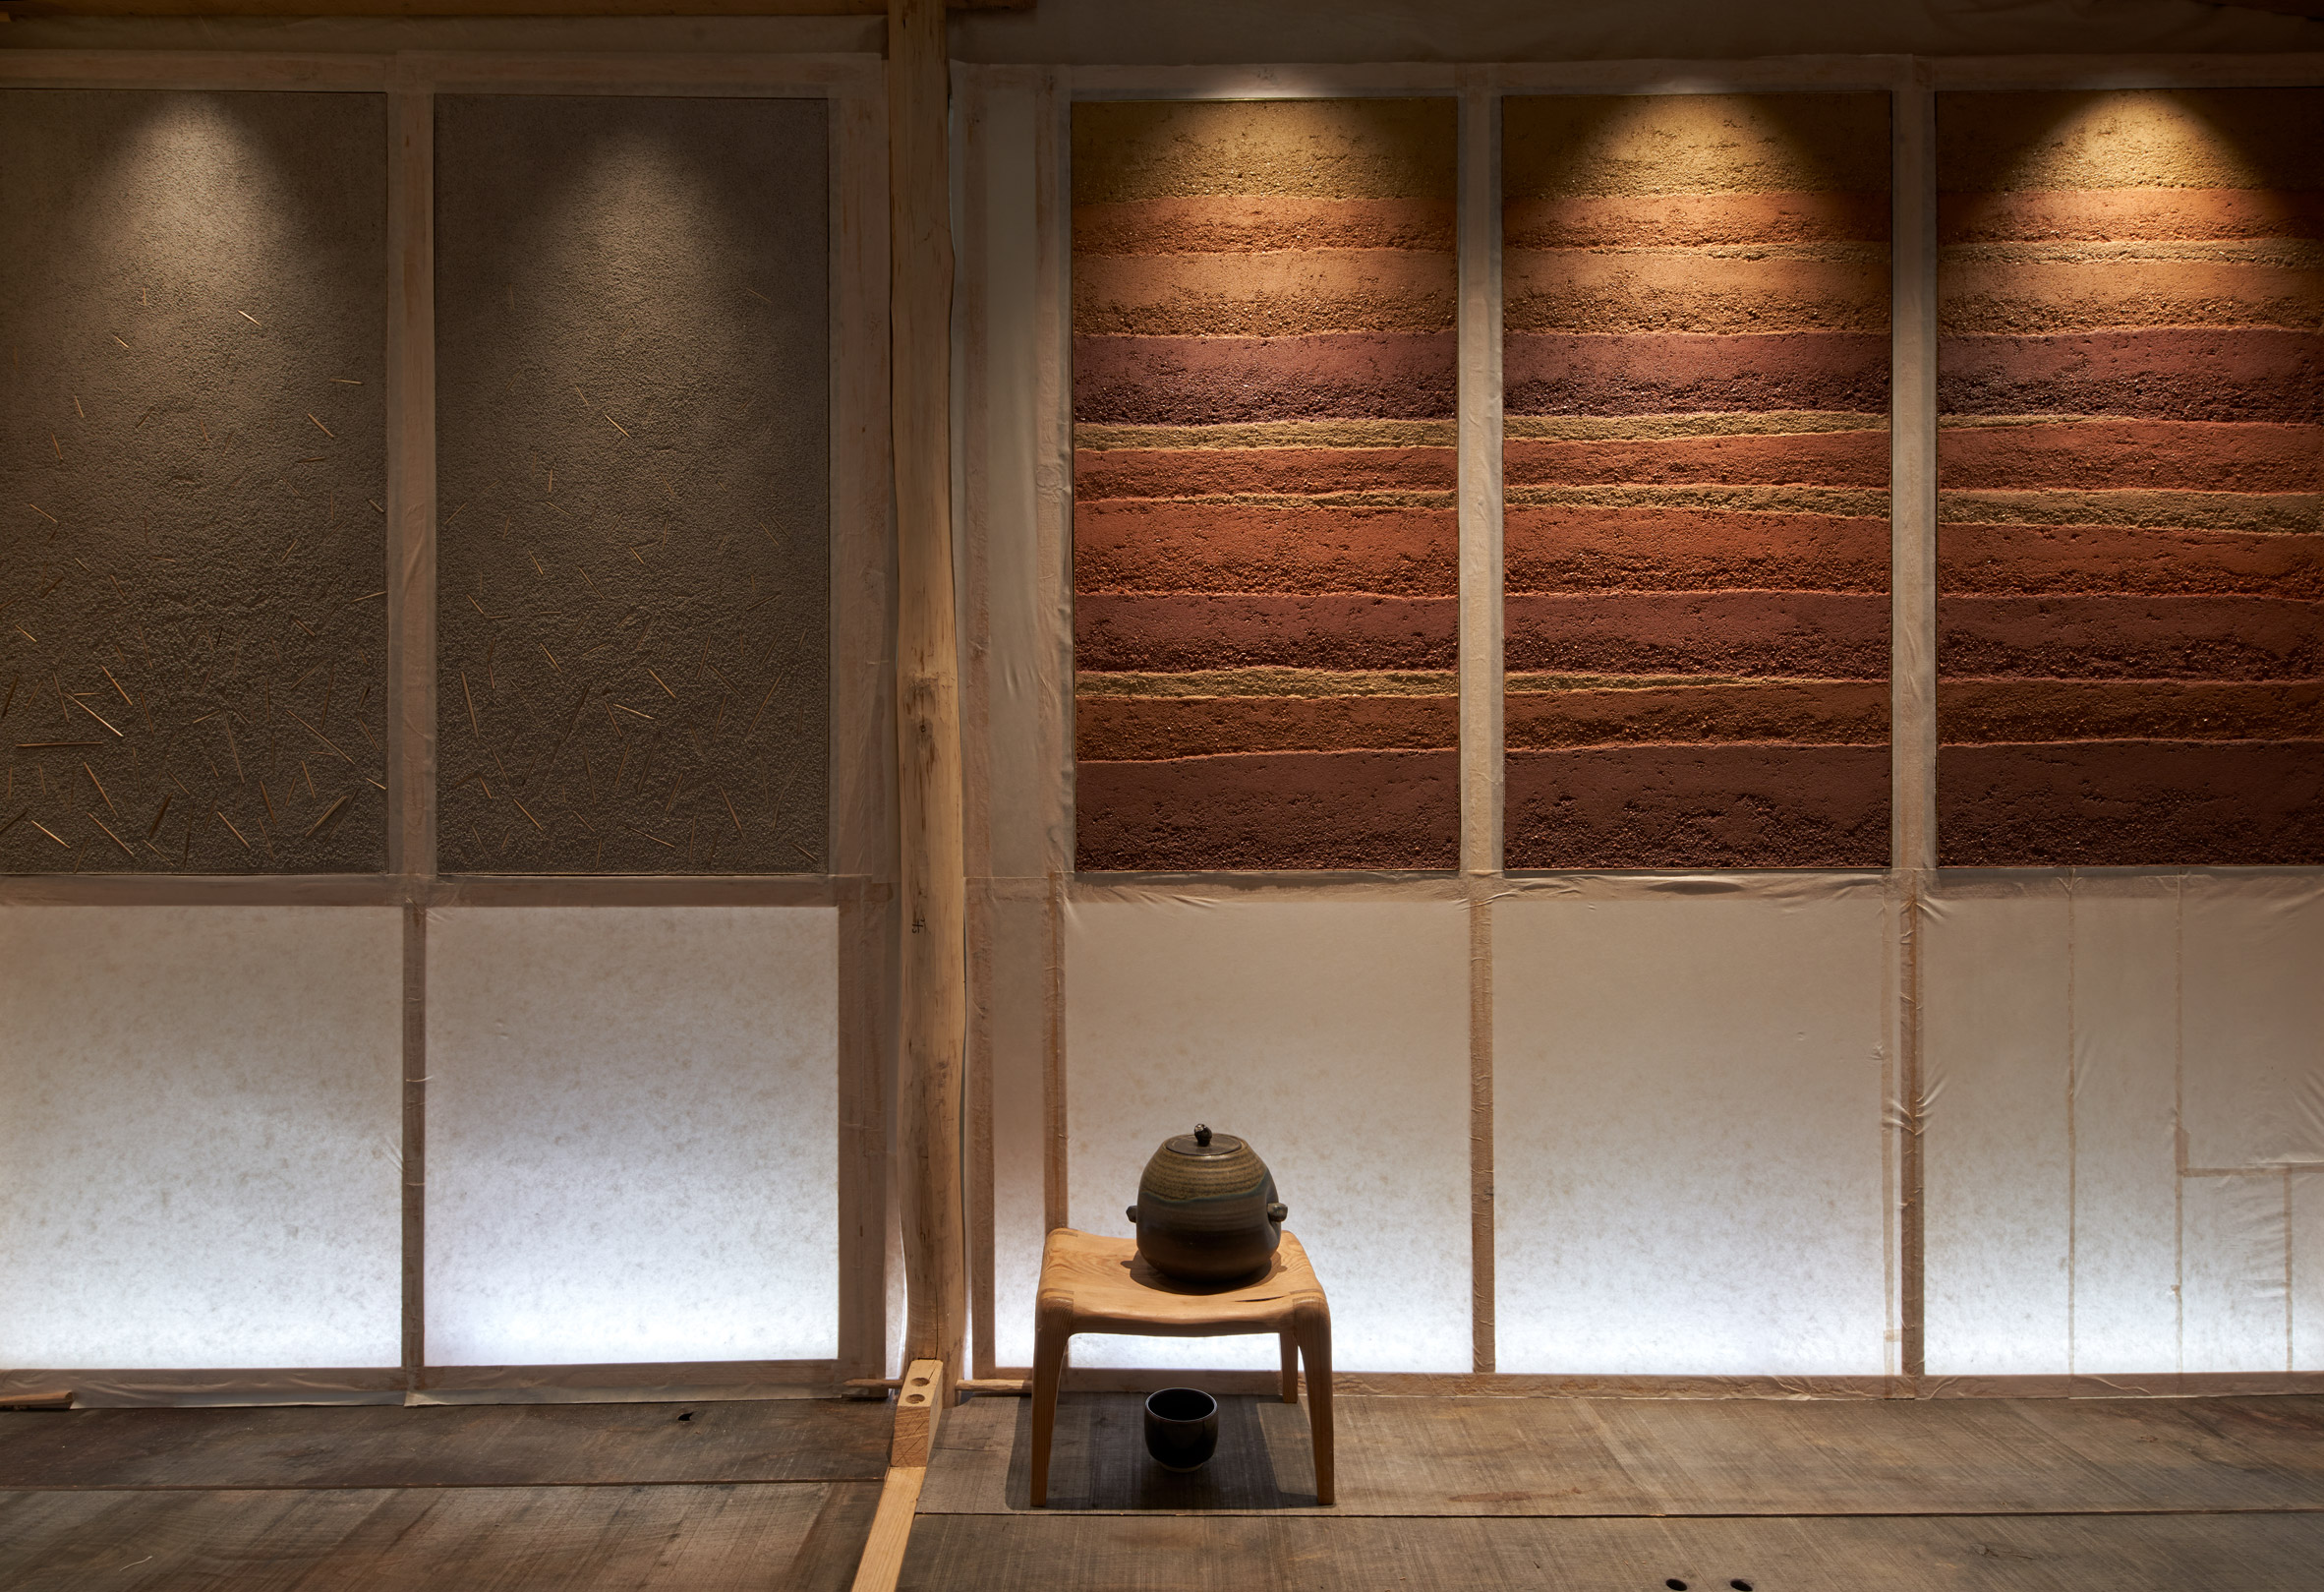 Teahouse interior with frosted glass and rammed earth screens